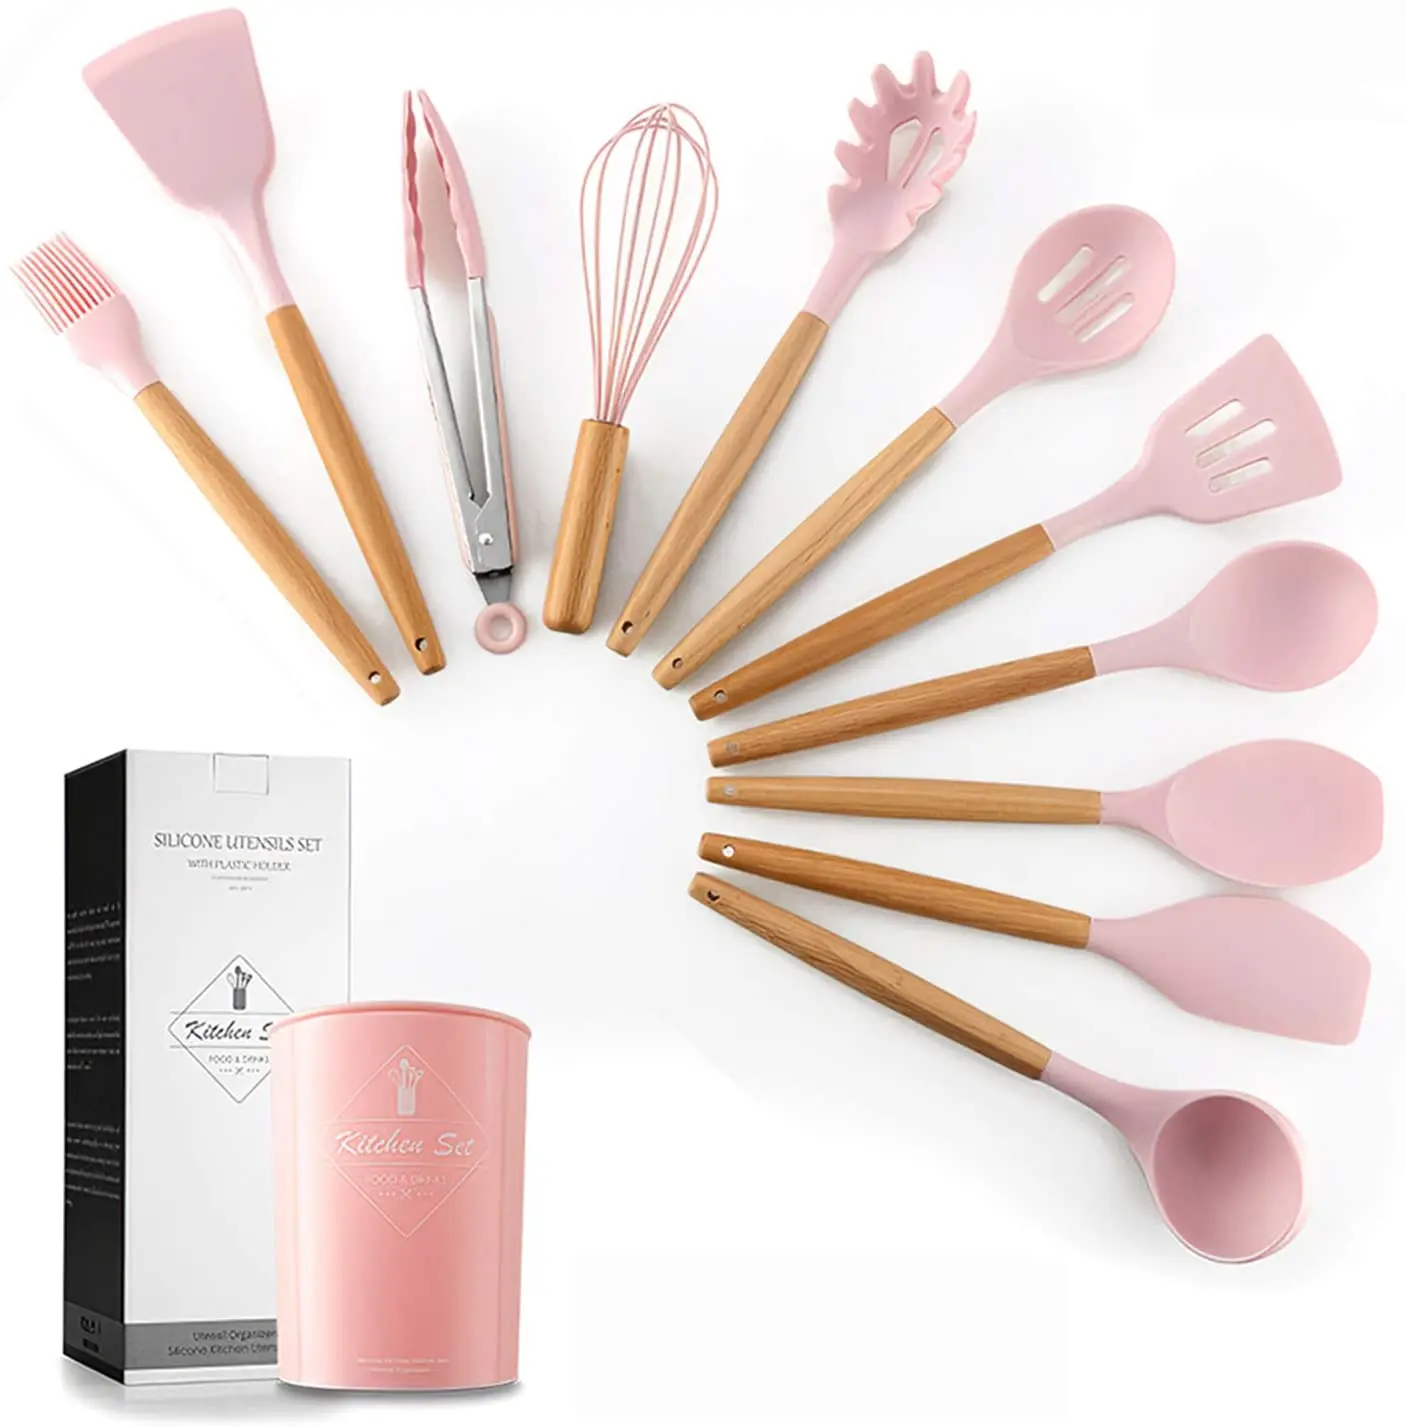 

12 Pcs Cheap Kitchenware Kitchen Tools Pink Silicone Utensil Kitchen Set With Wooden Handle And Holder, Customized color